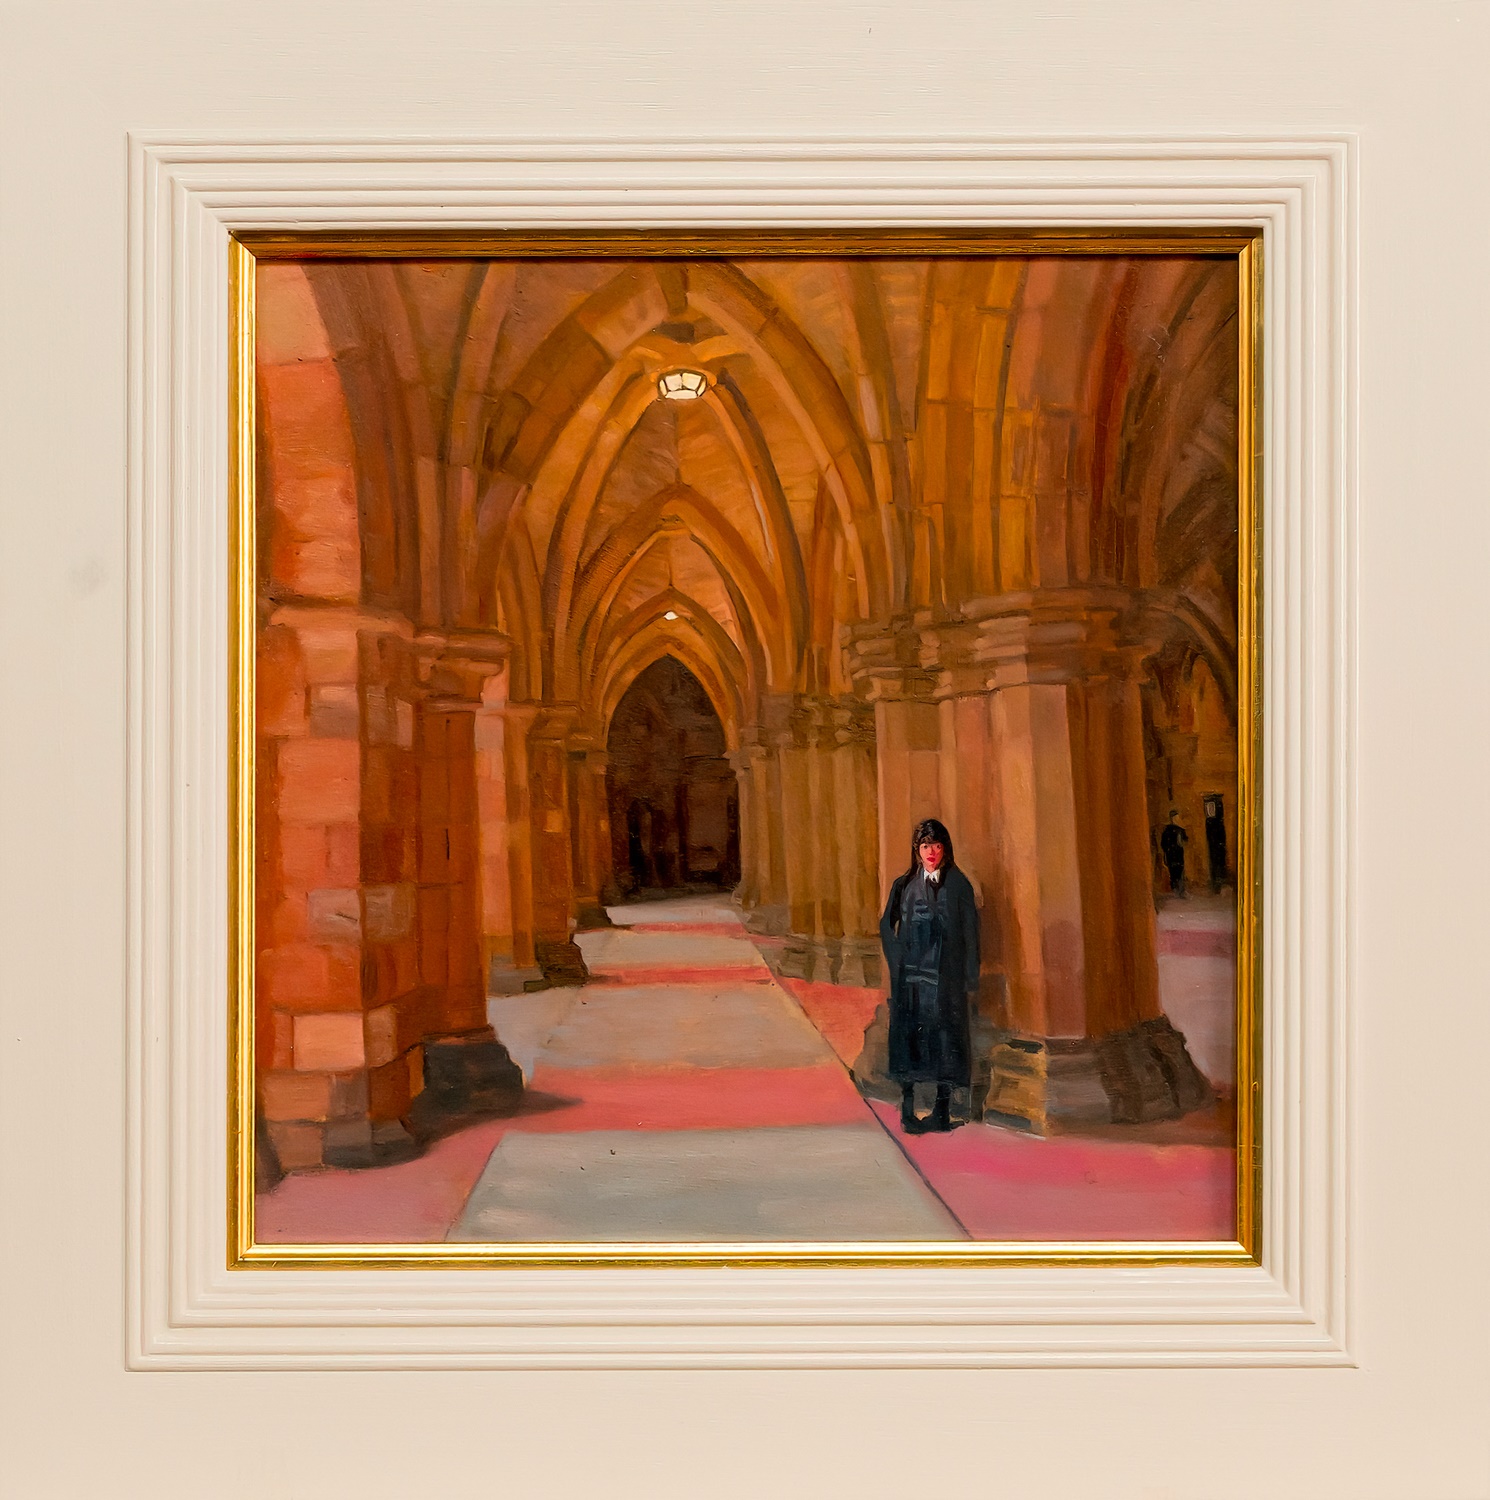 ANDREW FITZPATRICK, INSIDE THE CLOISTERS (GLASGOW UNIVERSITY)